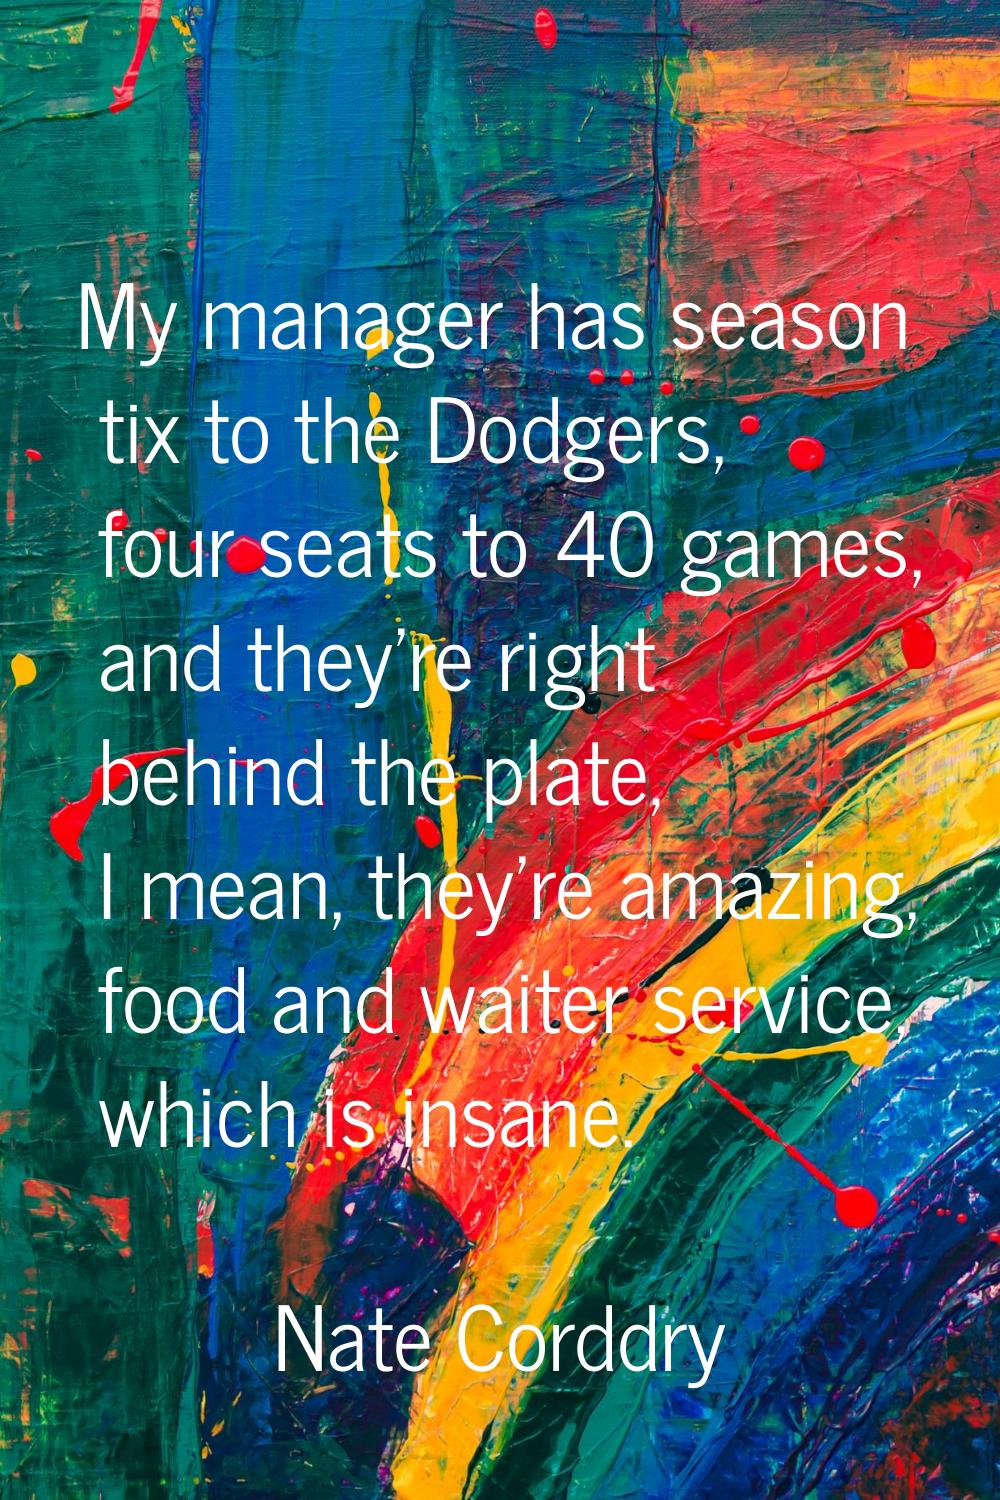 My manager has season tix to the Dodgers, four seats to 40 games, and they're right behind the plat